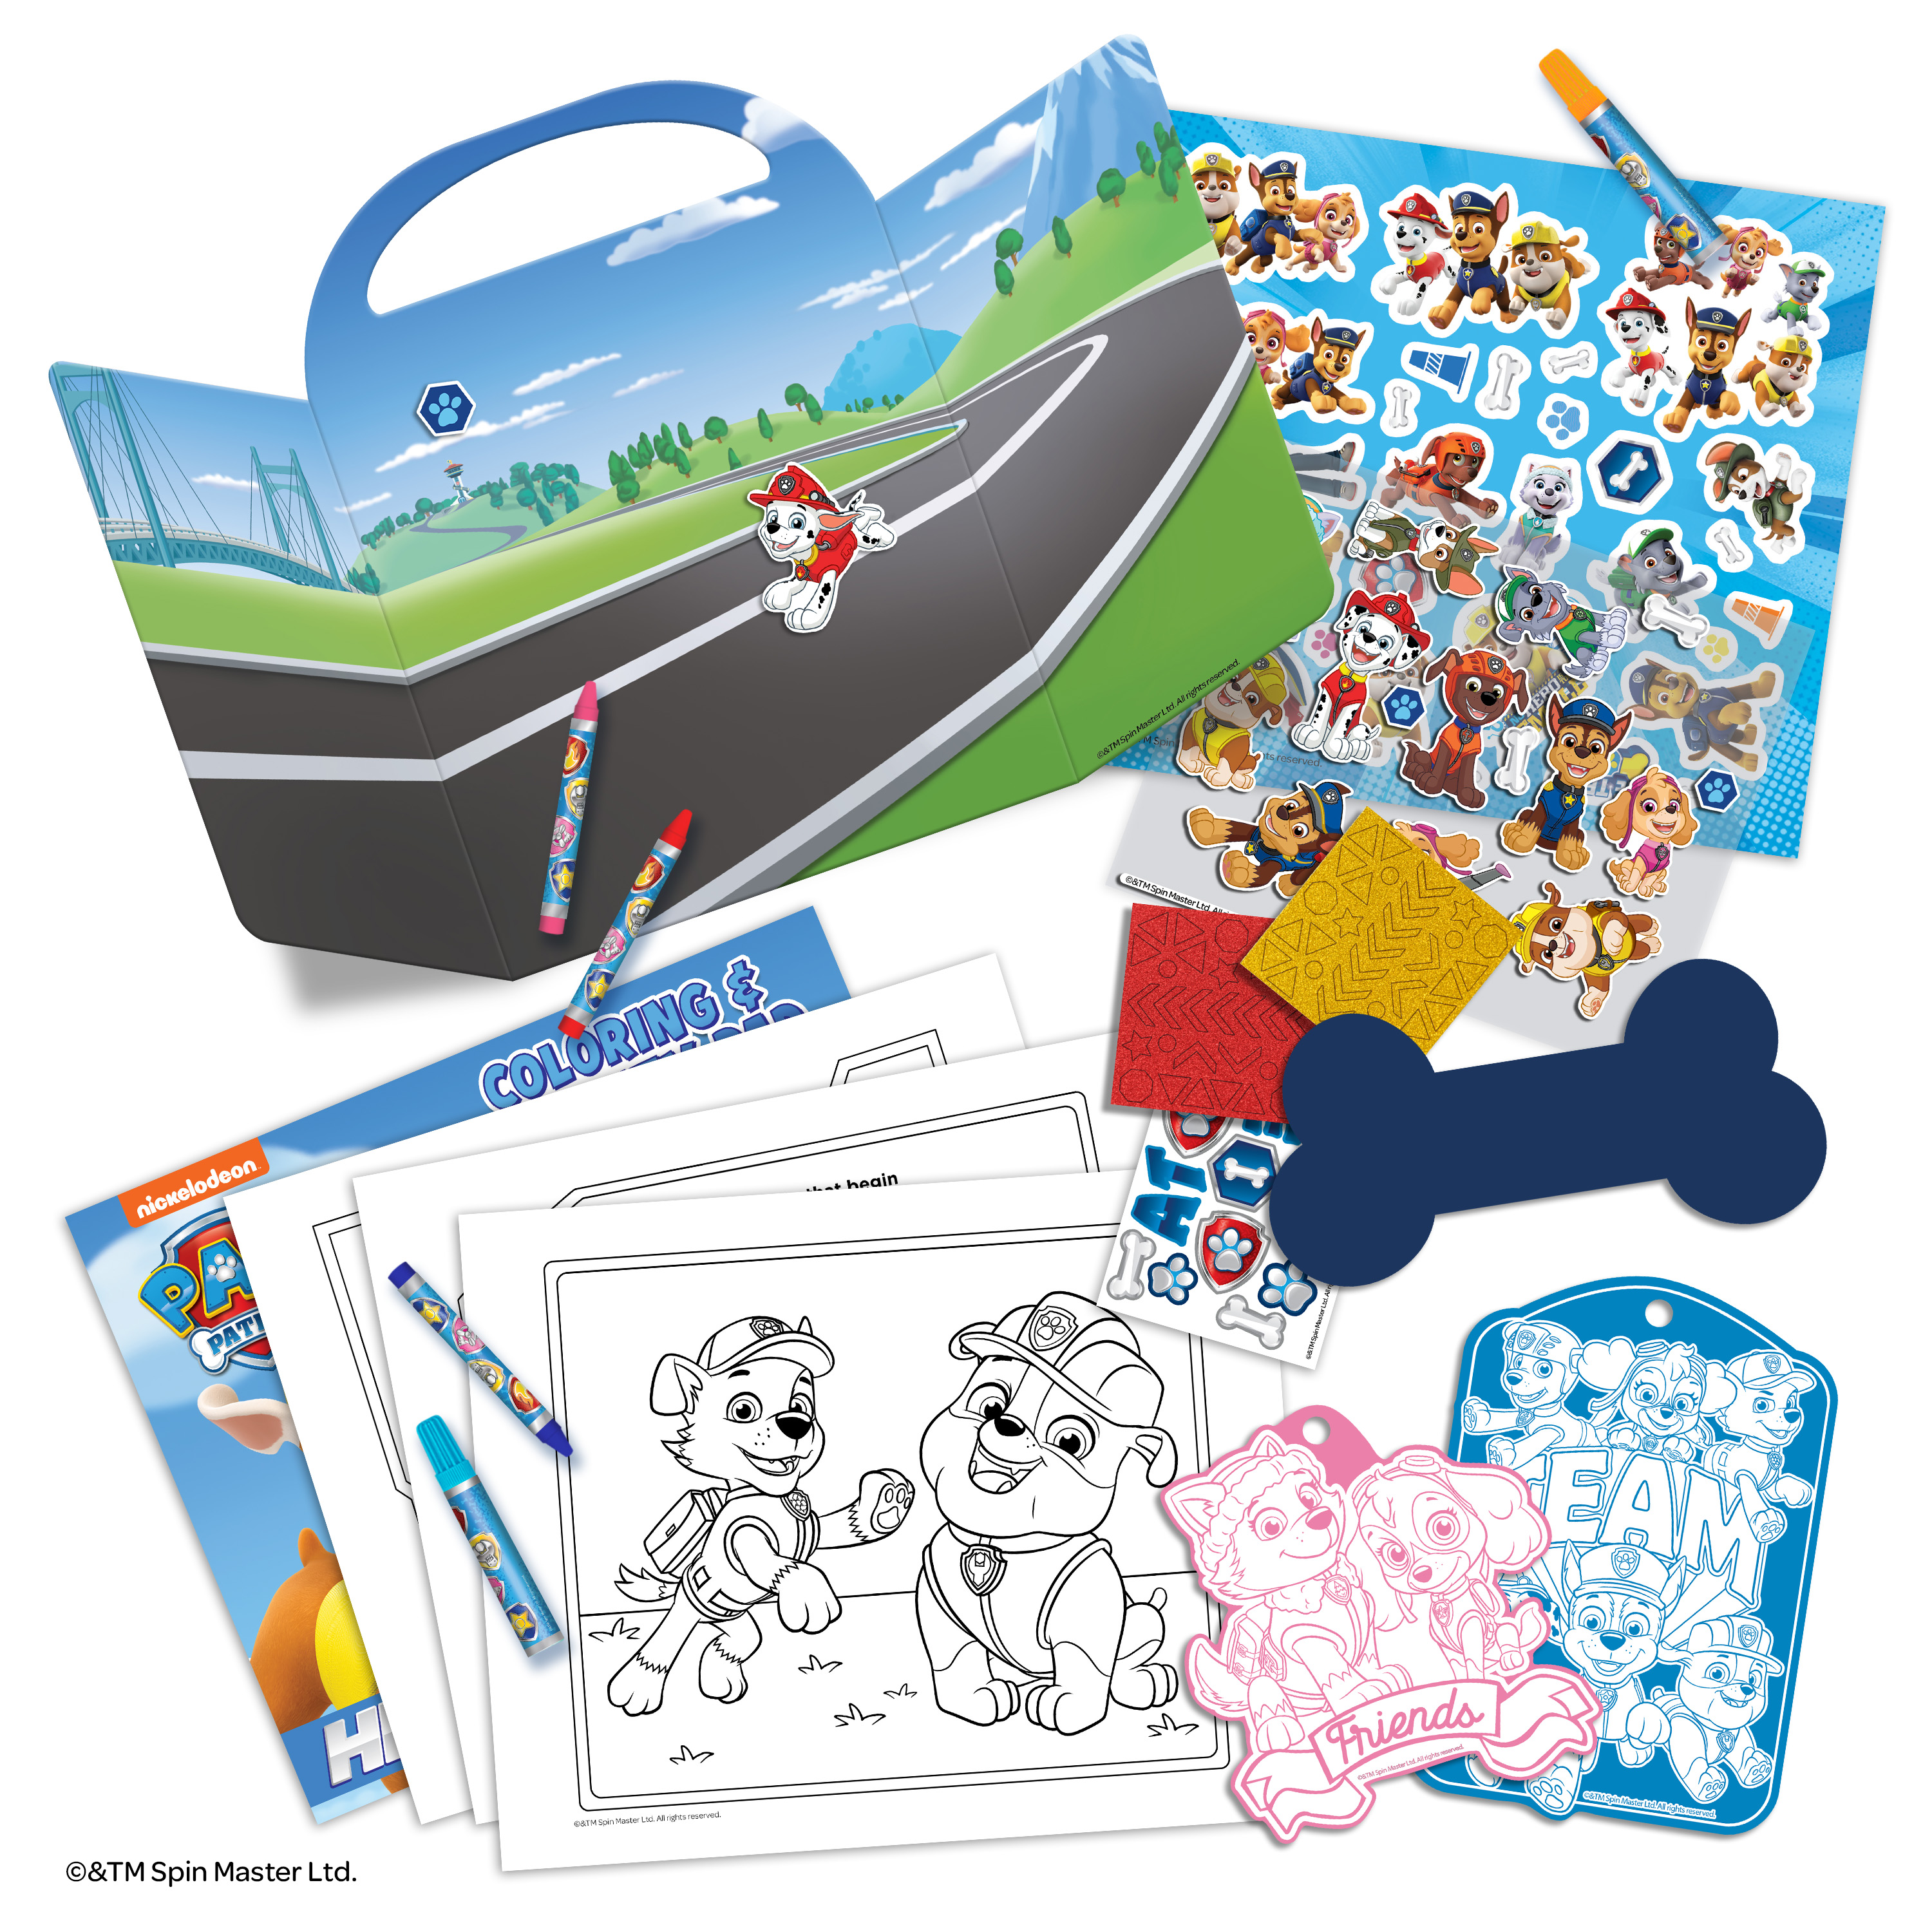 PAW Patrol Art Tub with a Coloring Book and Coloring Supplies - image 4 of 9